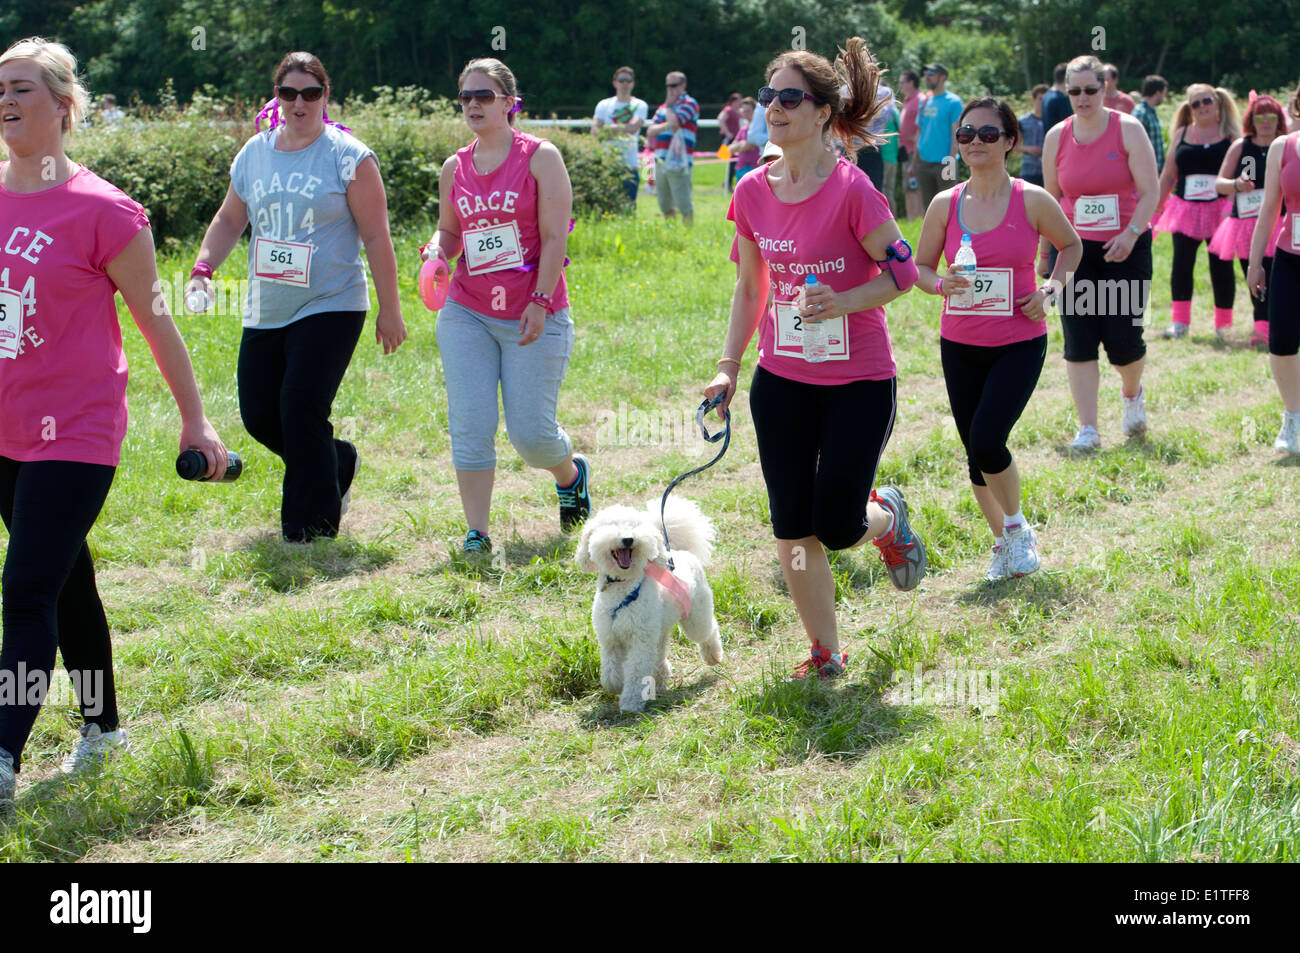 Race for Life, Cancer Research UK charity event Stock Photo